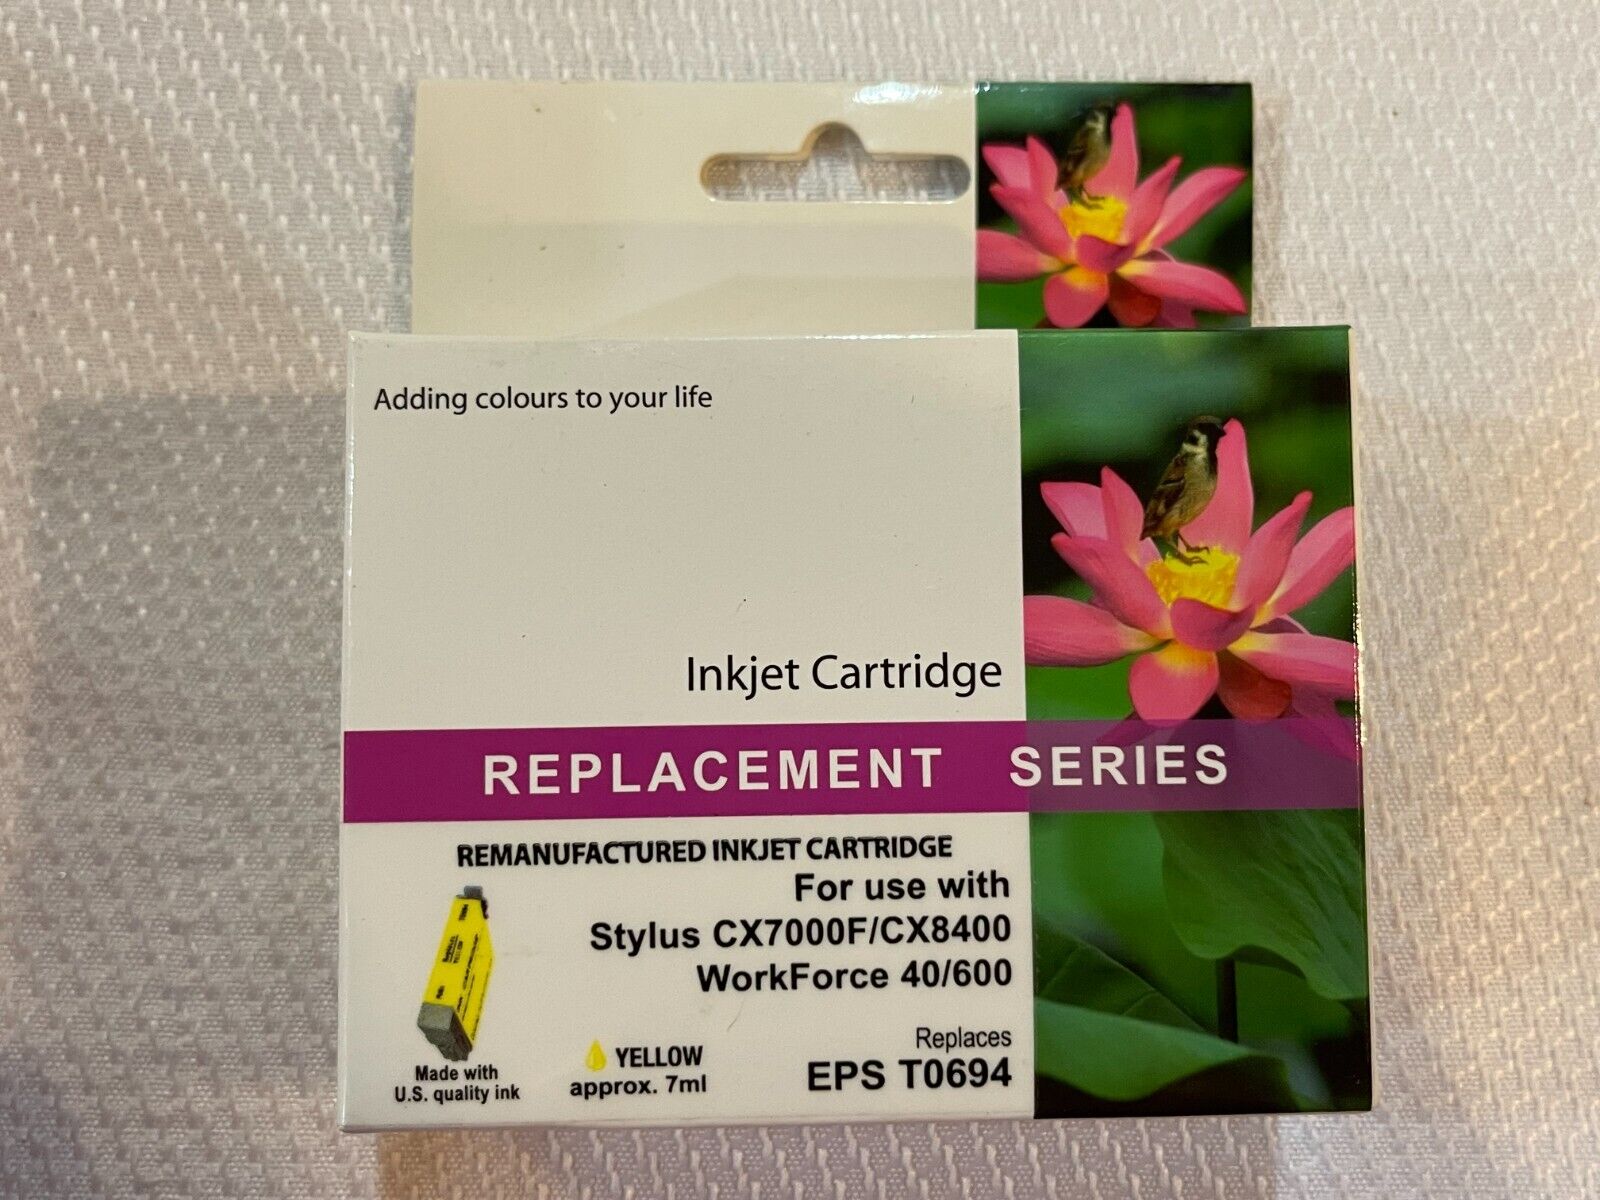 Remanufactured Inkjet Cartridge - For Epson 69 - EPS T0694 - Yellow - 